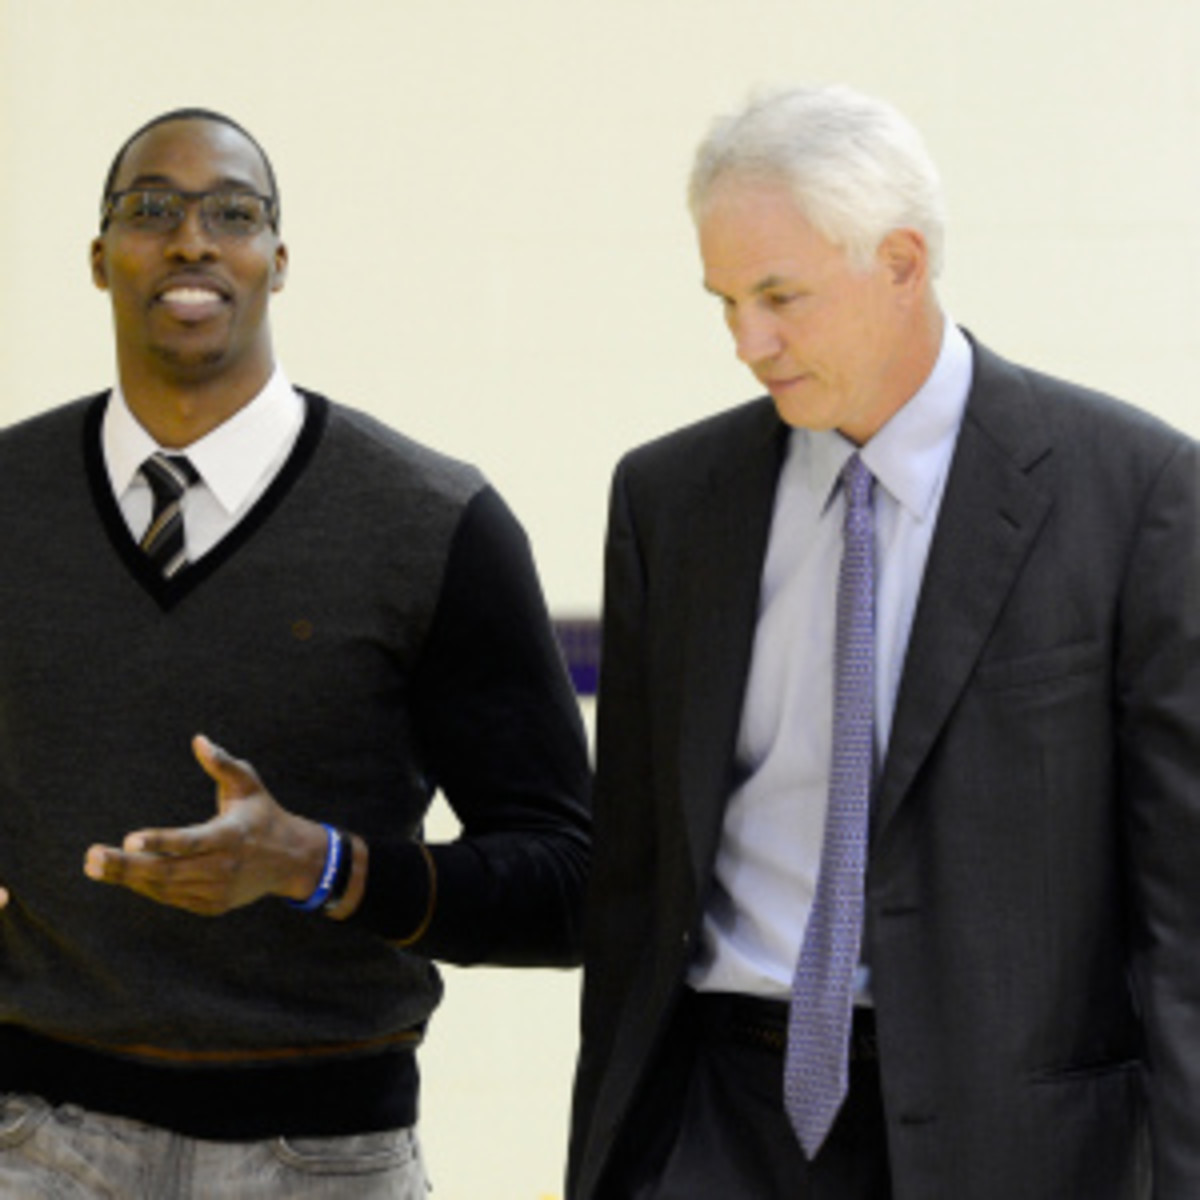 Lakers general manager Mitch Kupchak said he wants a better effort from his players. (Kevork Djansezian/Getty Images)